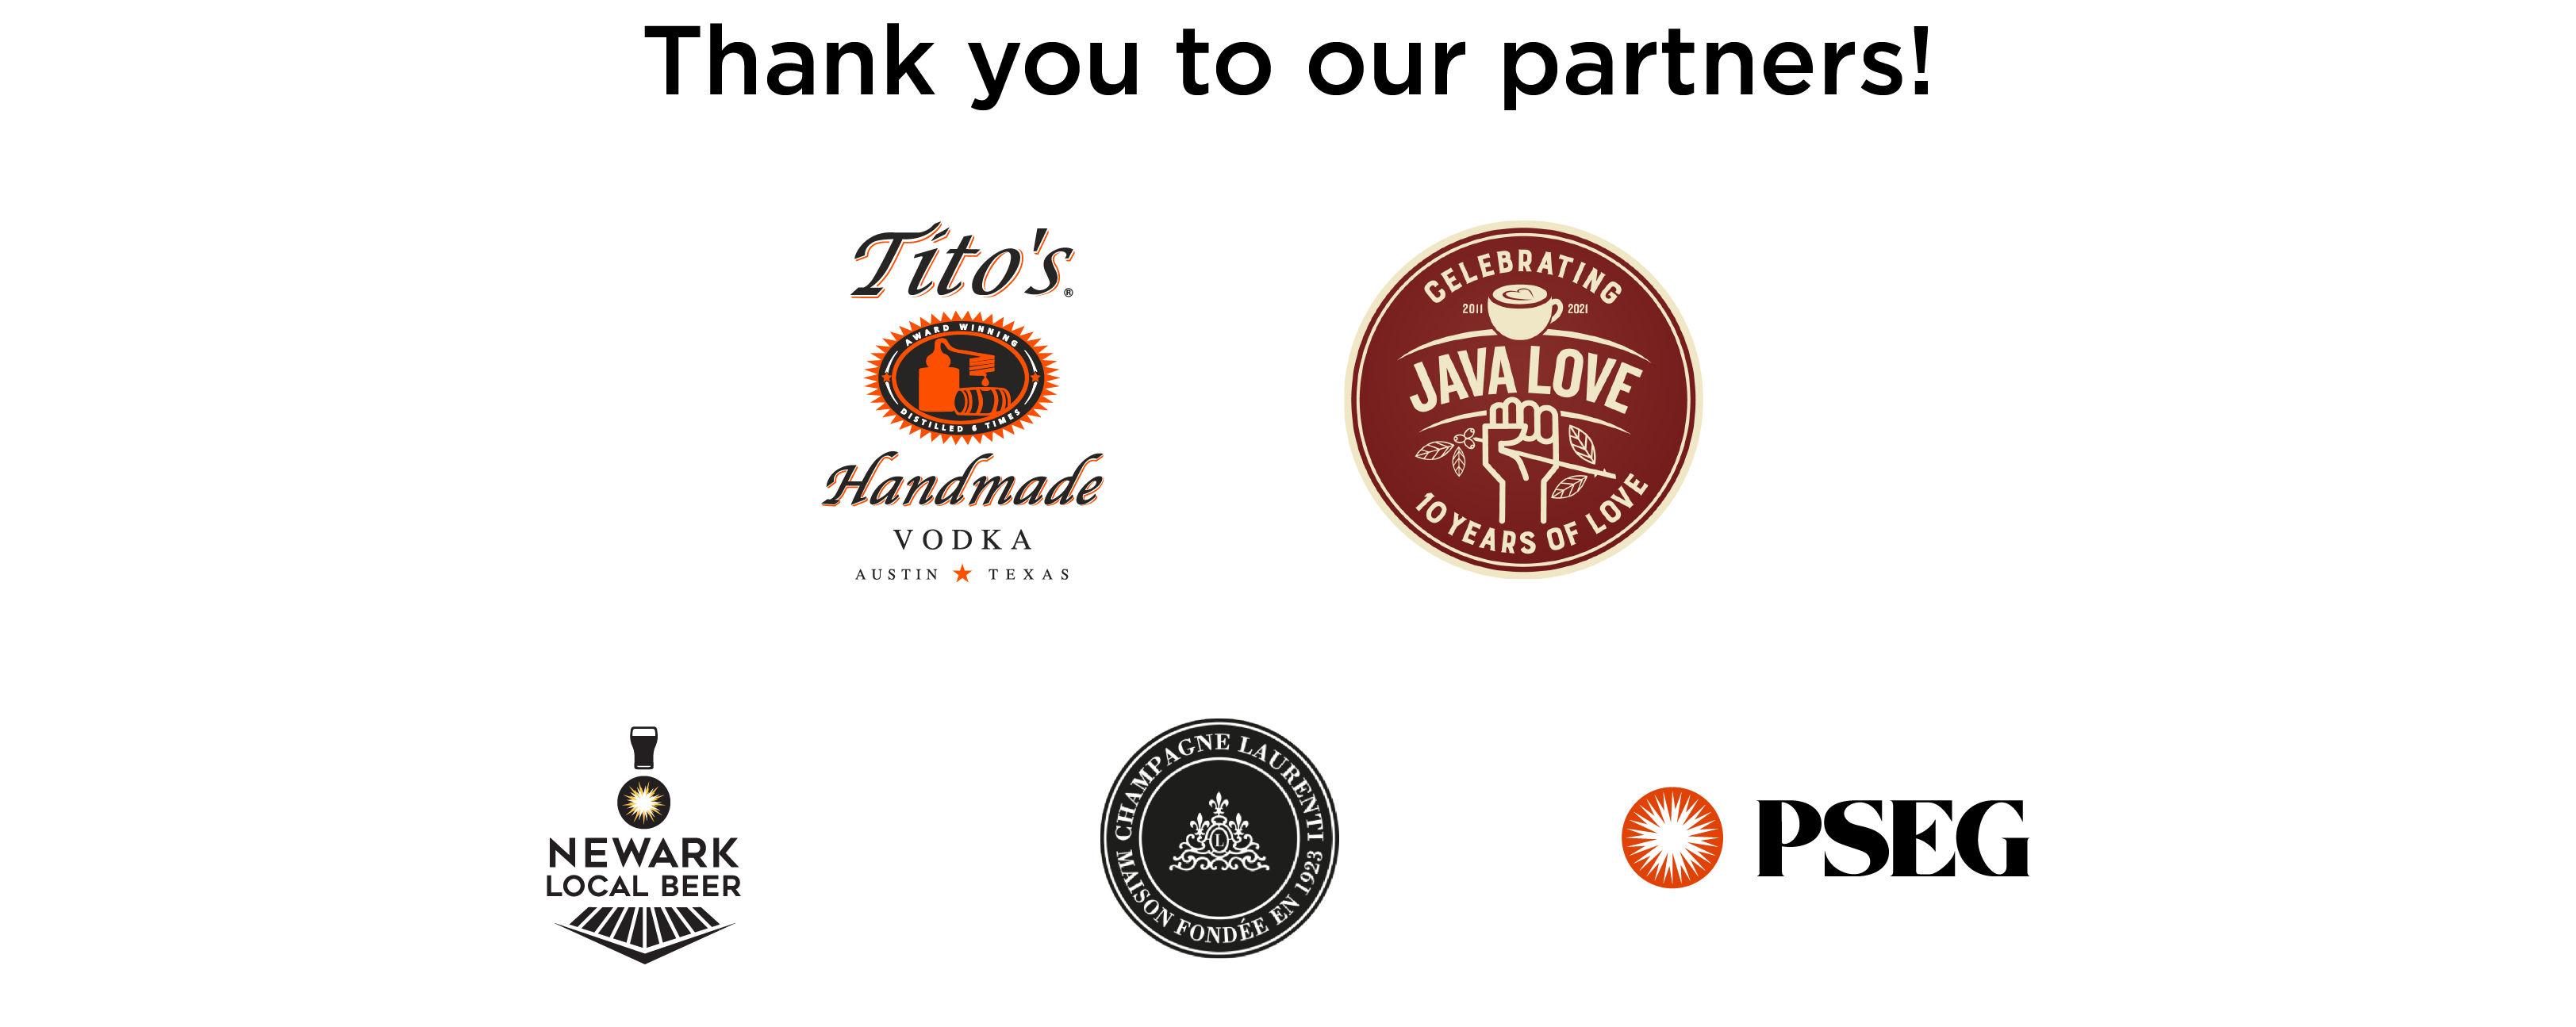 Logos of sponsors: Titos Vodka, Java Love Coffee Roasters, Newark Local Beer, Champagne Laurenti, and PSE&G